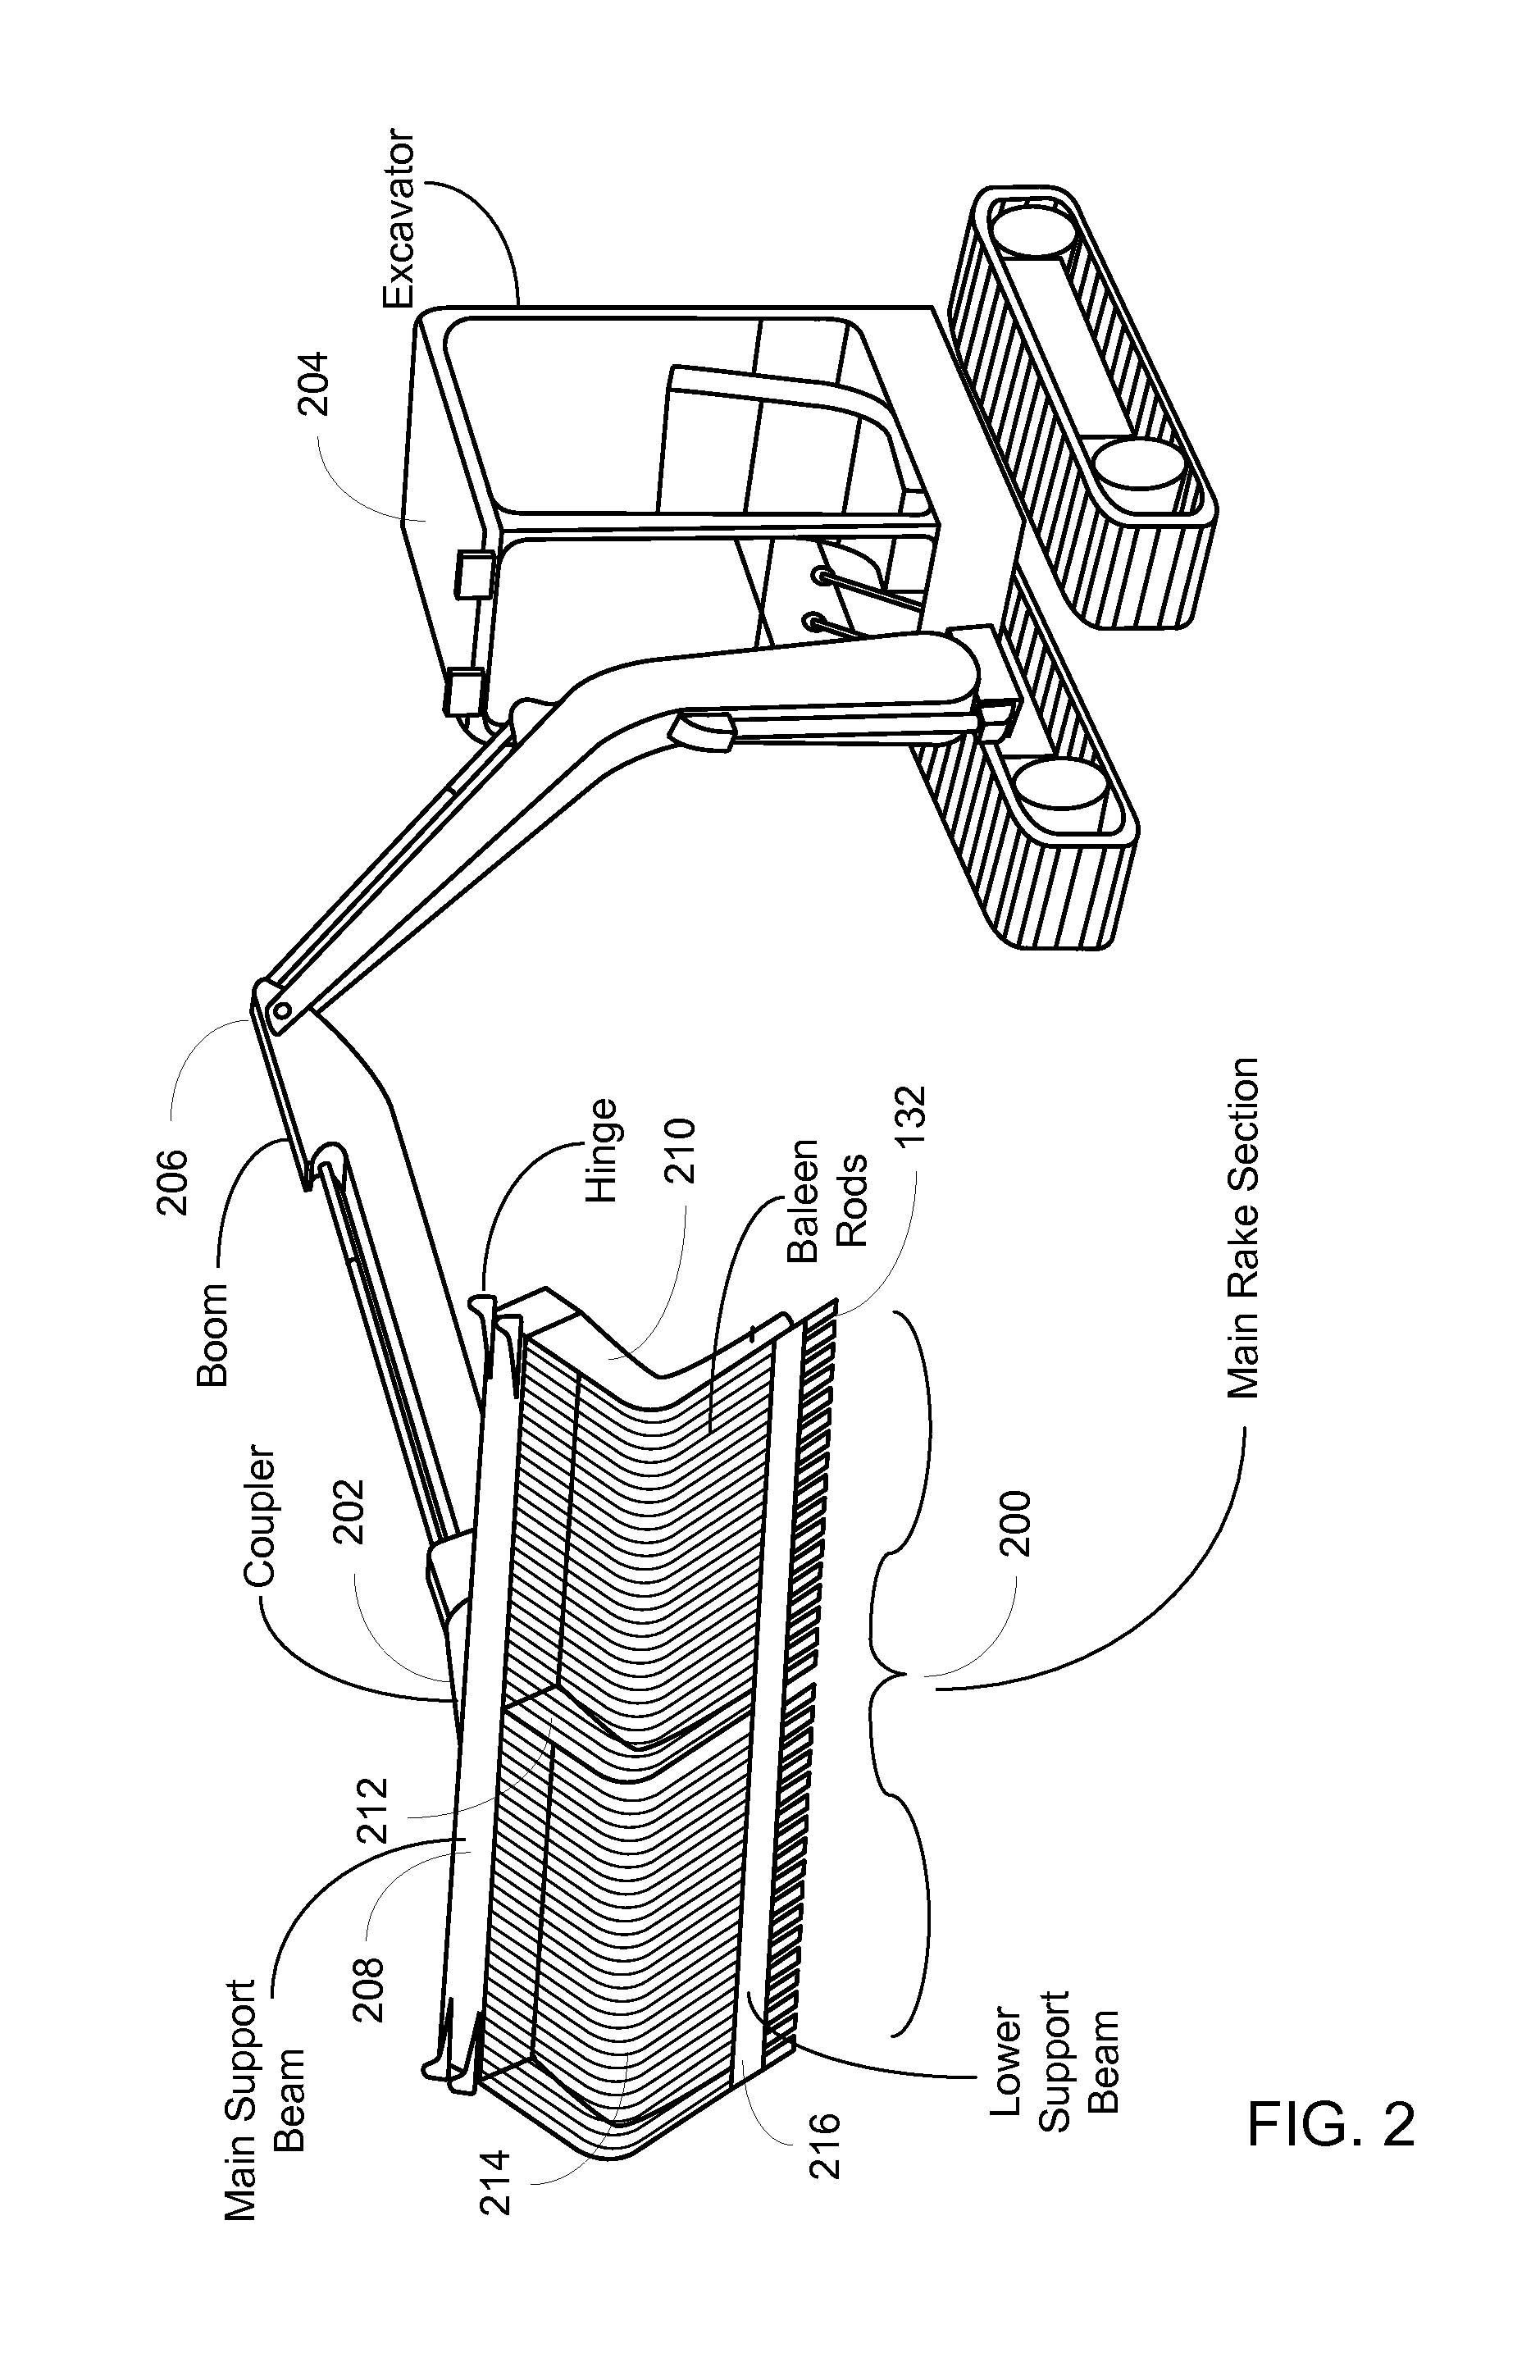 Method of controlling a vegetation removal system